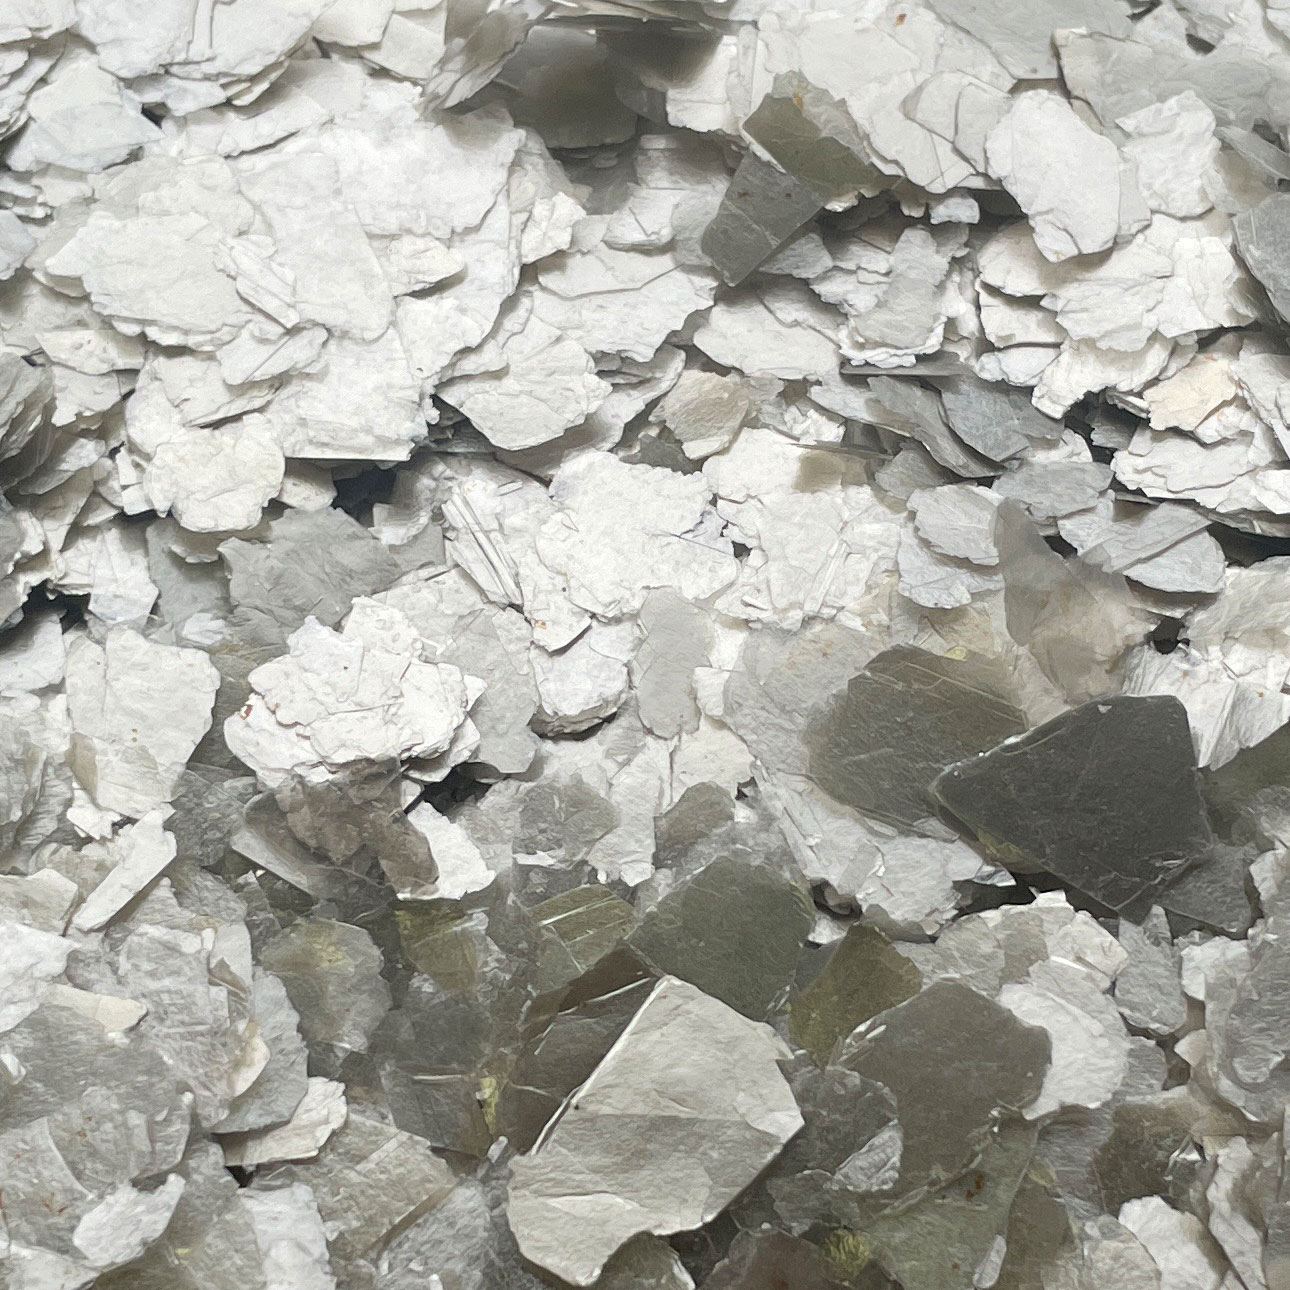 [BLOWOUT] Pure Metallic Naturals SILVER Mica Flakes 1/2'' - 2oz wt. (12oz by volume)